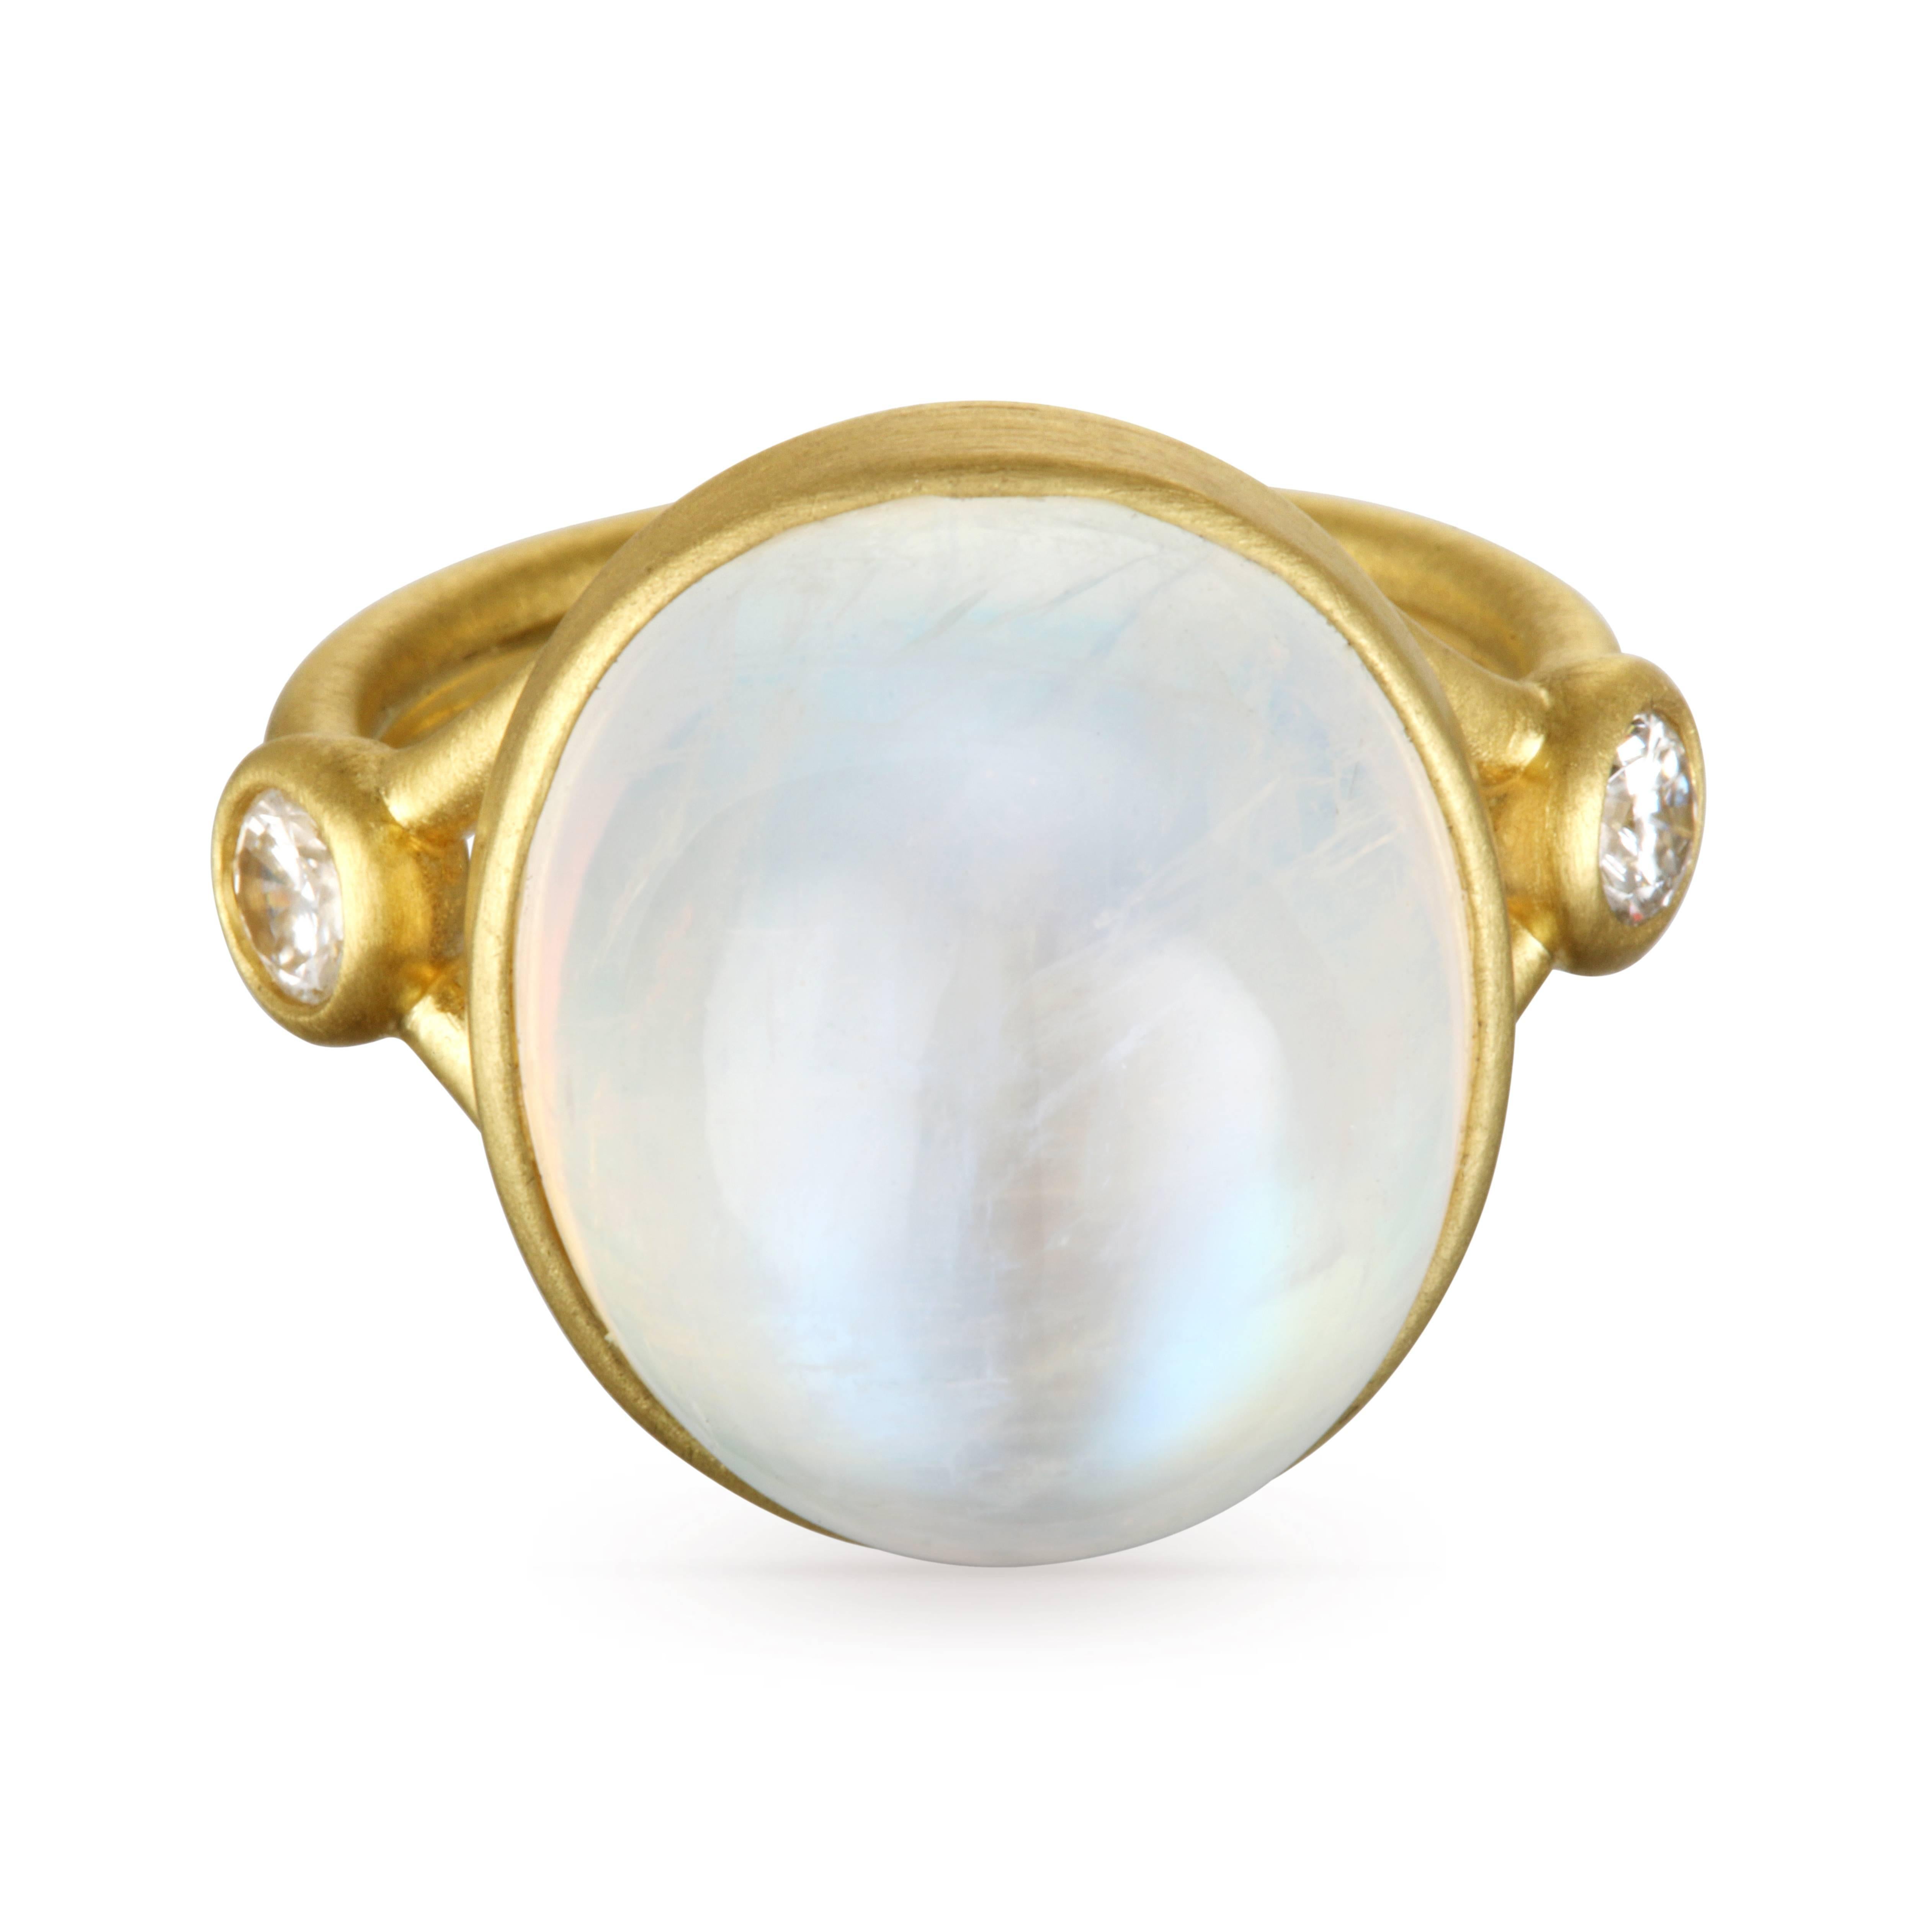 One of a kind, elegant and bold handmade ring in 18k green* gold.  The moonstone is cushion shaped, bezel set with white, round brilliant cut diamond accents on a split shank band.  Moonstone is 18.20 carats.  Diamonds are .24 carats total weight, G